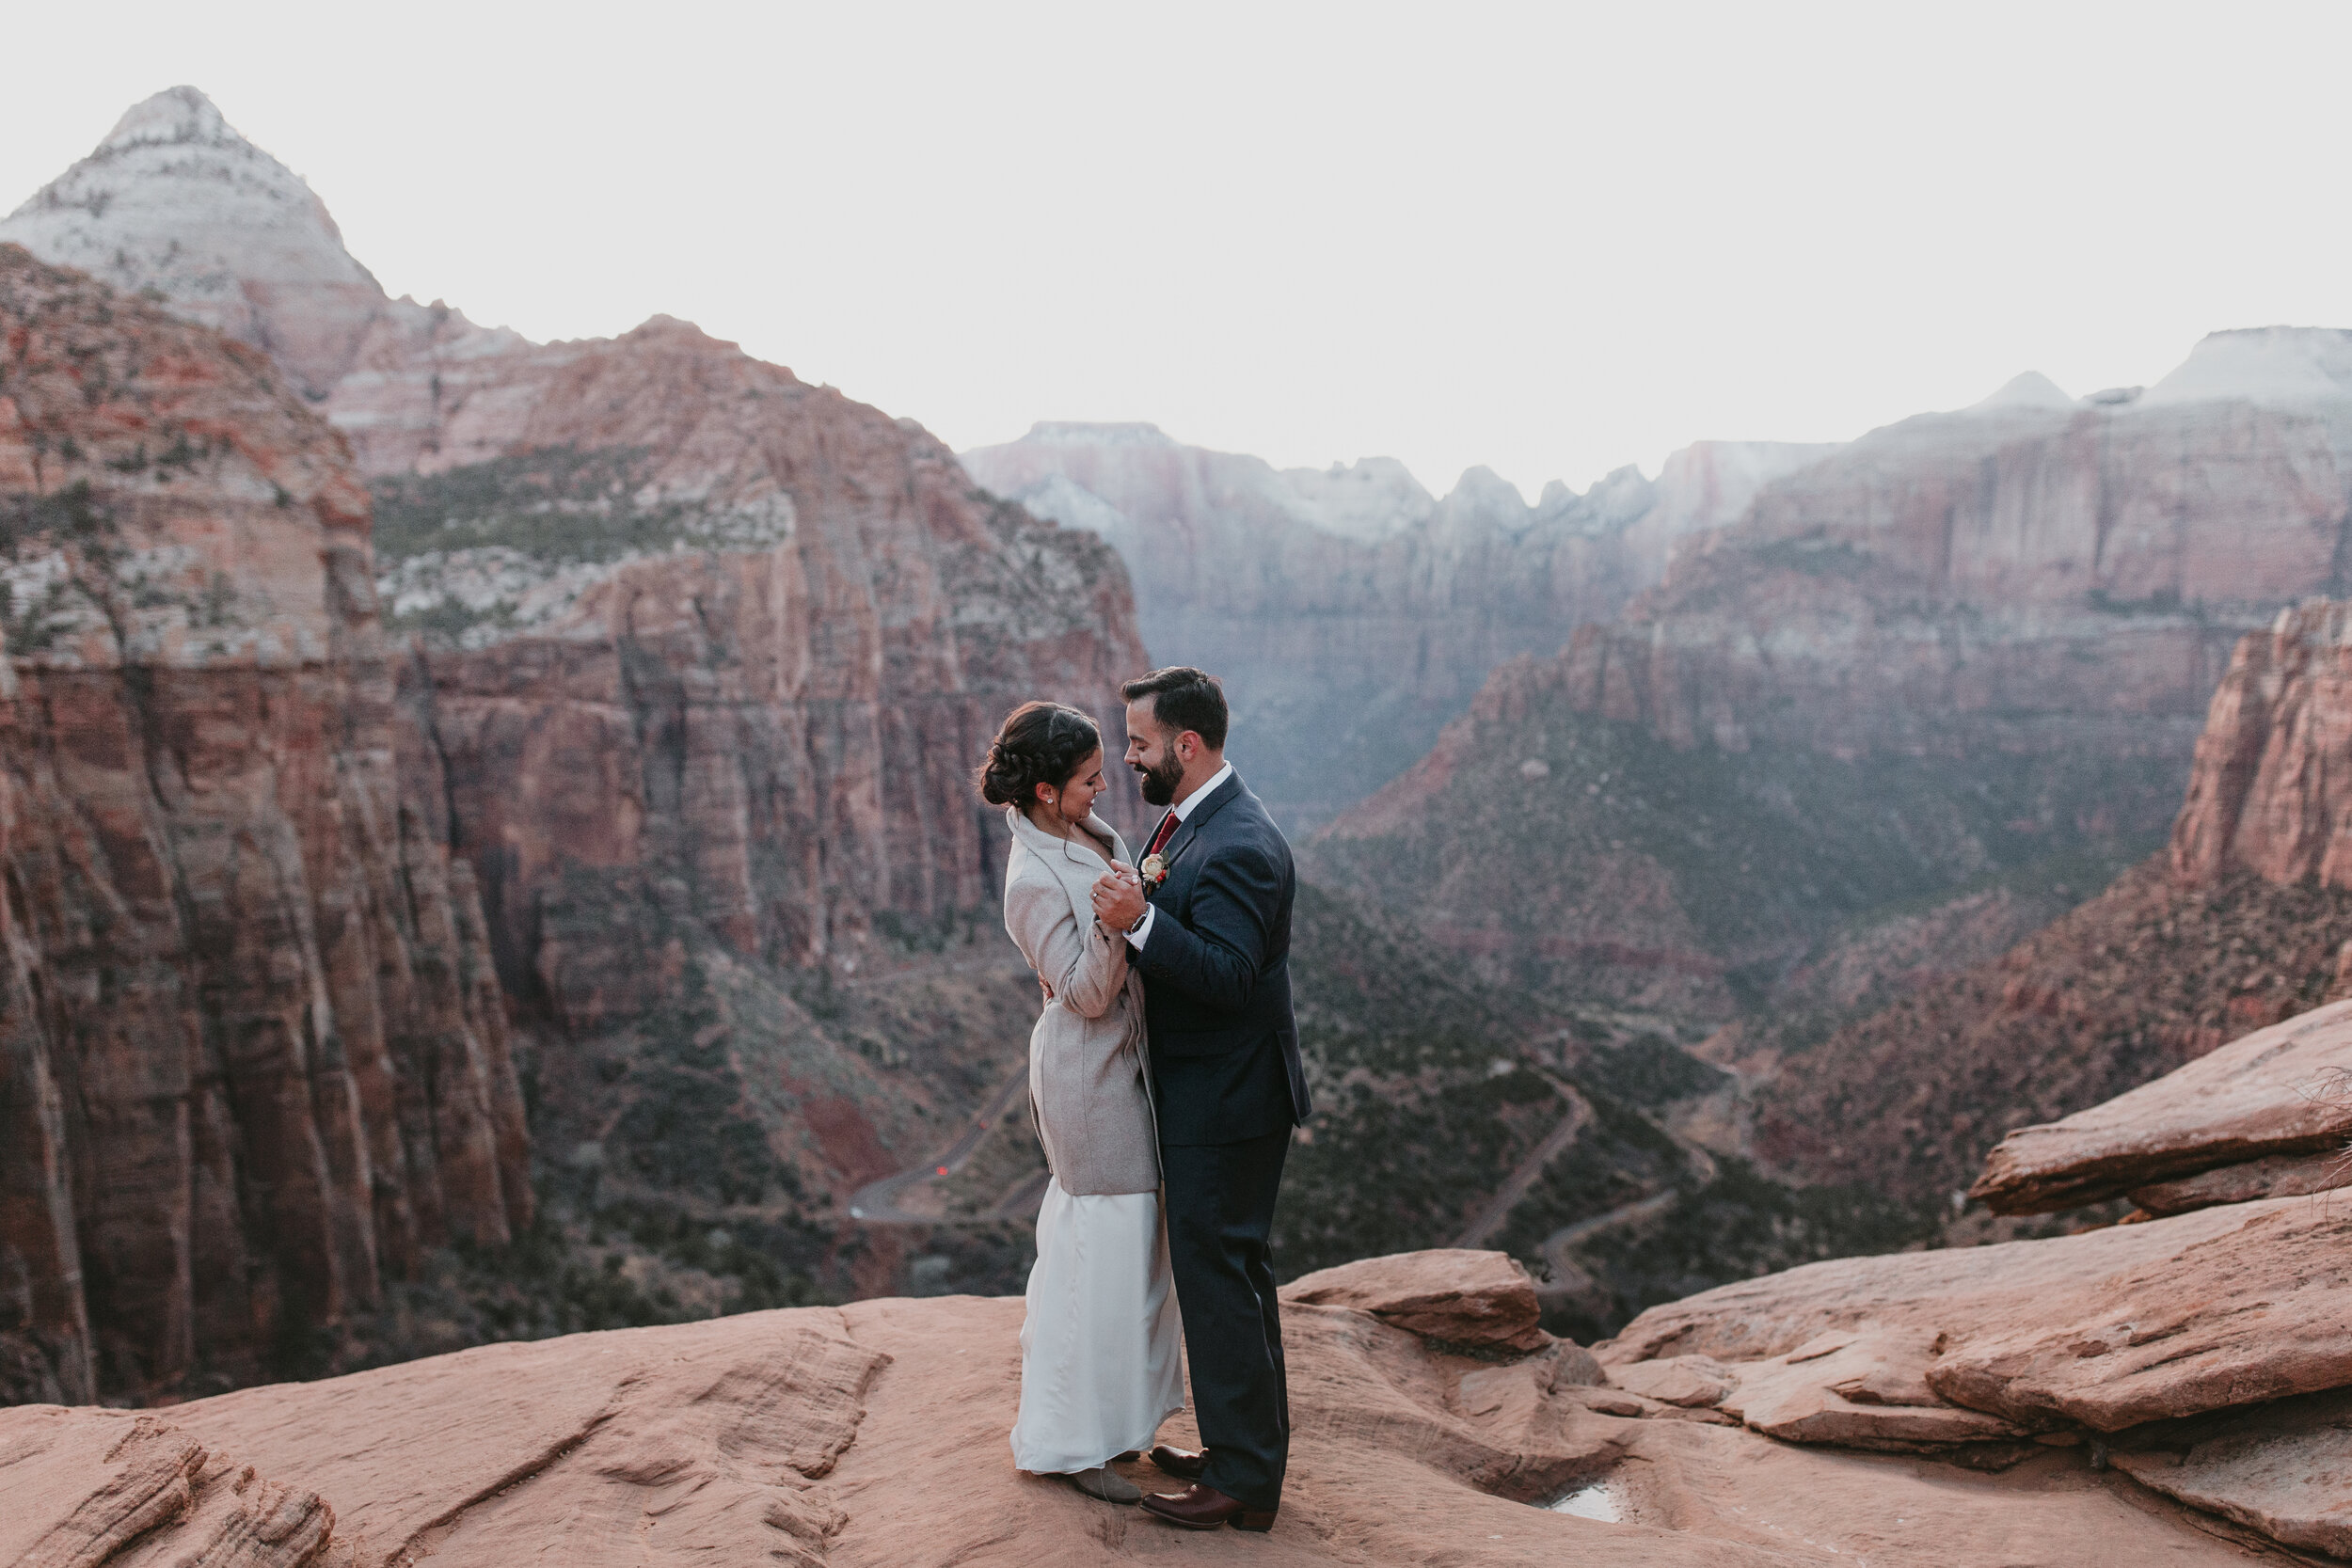 Nicole-Daacke-Photography-snowy-hiking-elopement-in-zion-national-park-zion-elopement-photographer-canyon-overlook-trial-brial-portraits-in-mt-zion-national-park-utah-desert-adventure-elopement-photographer-171.jpg